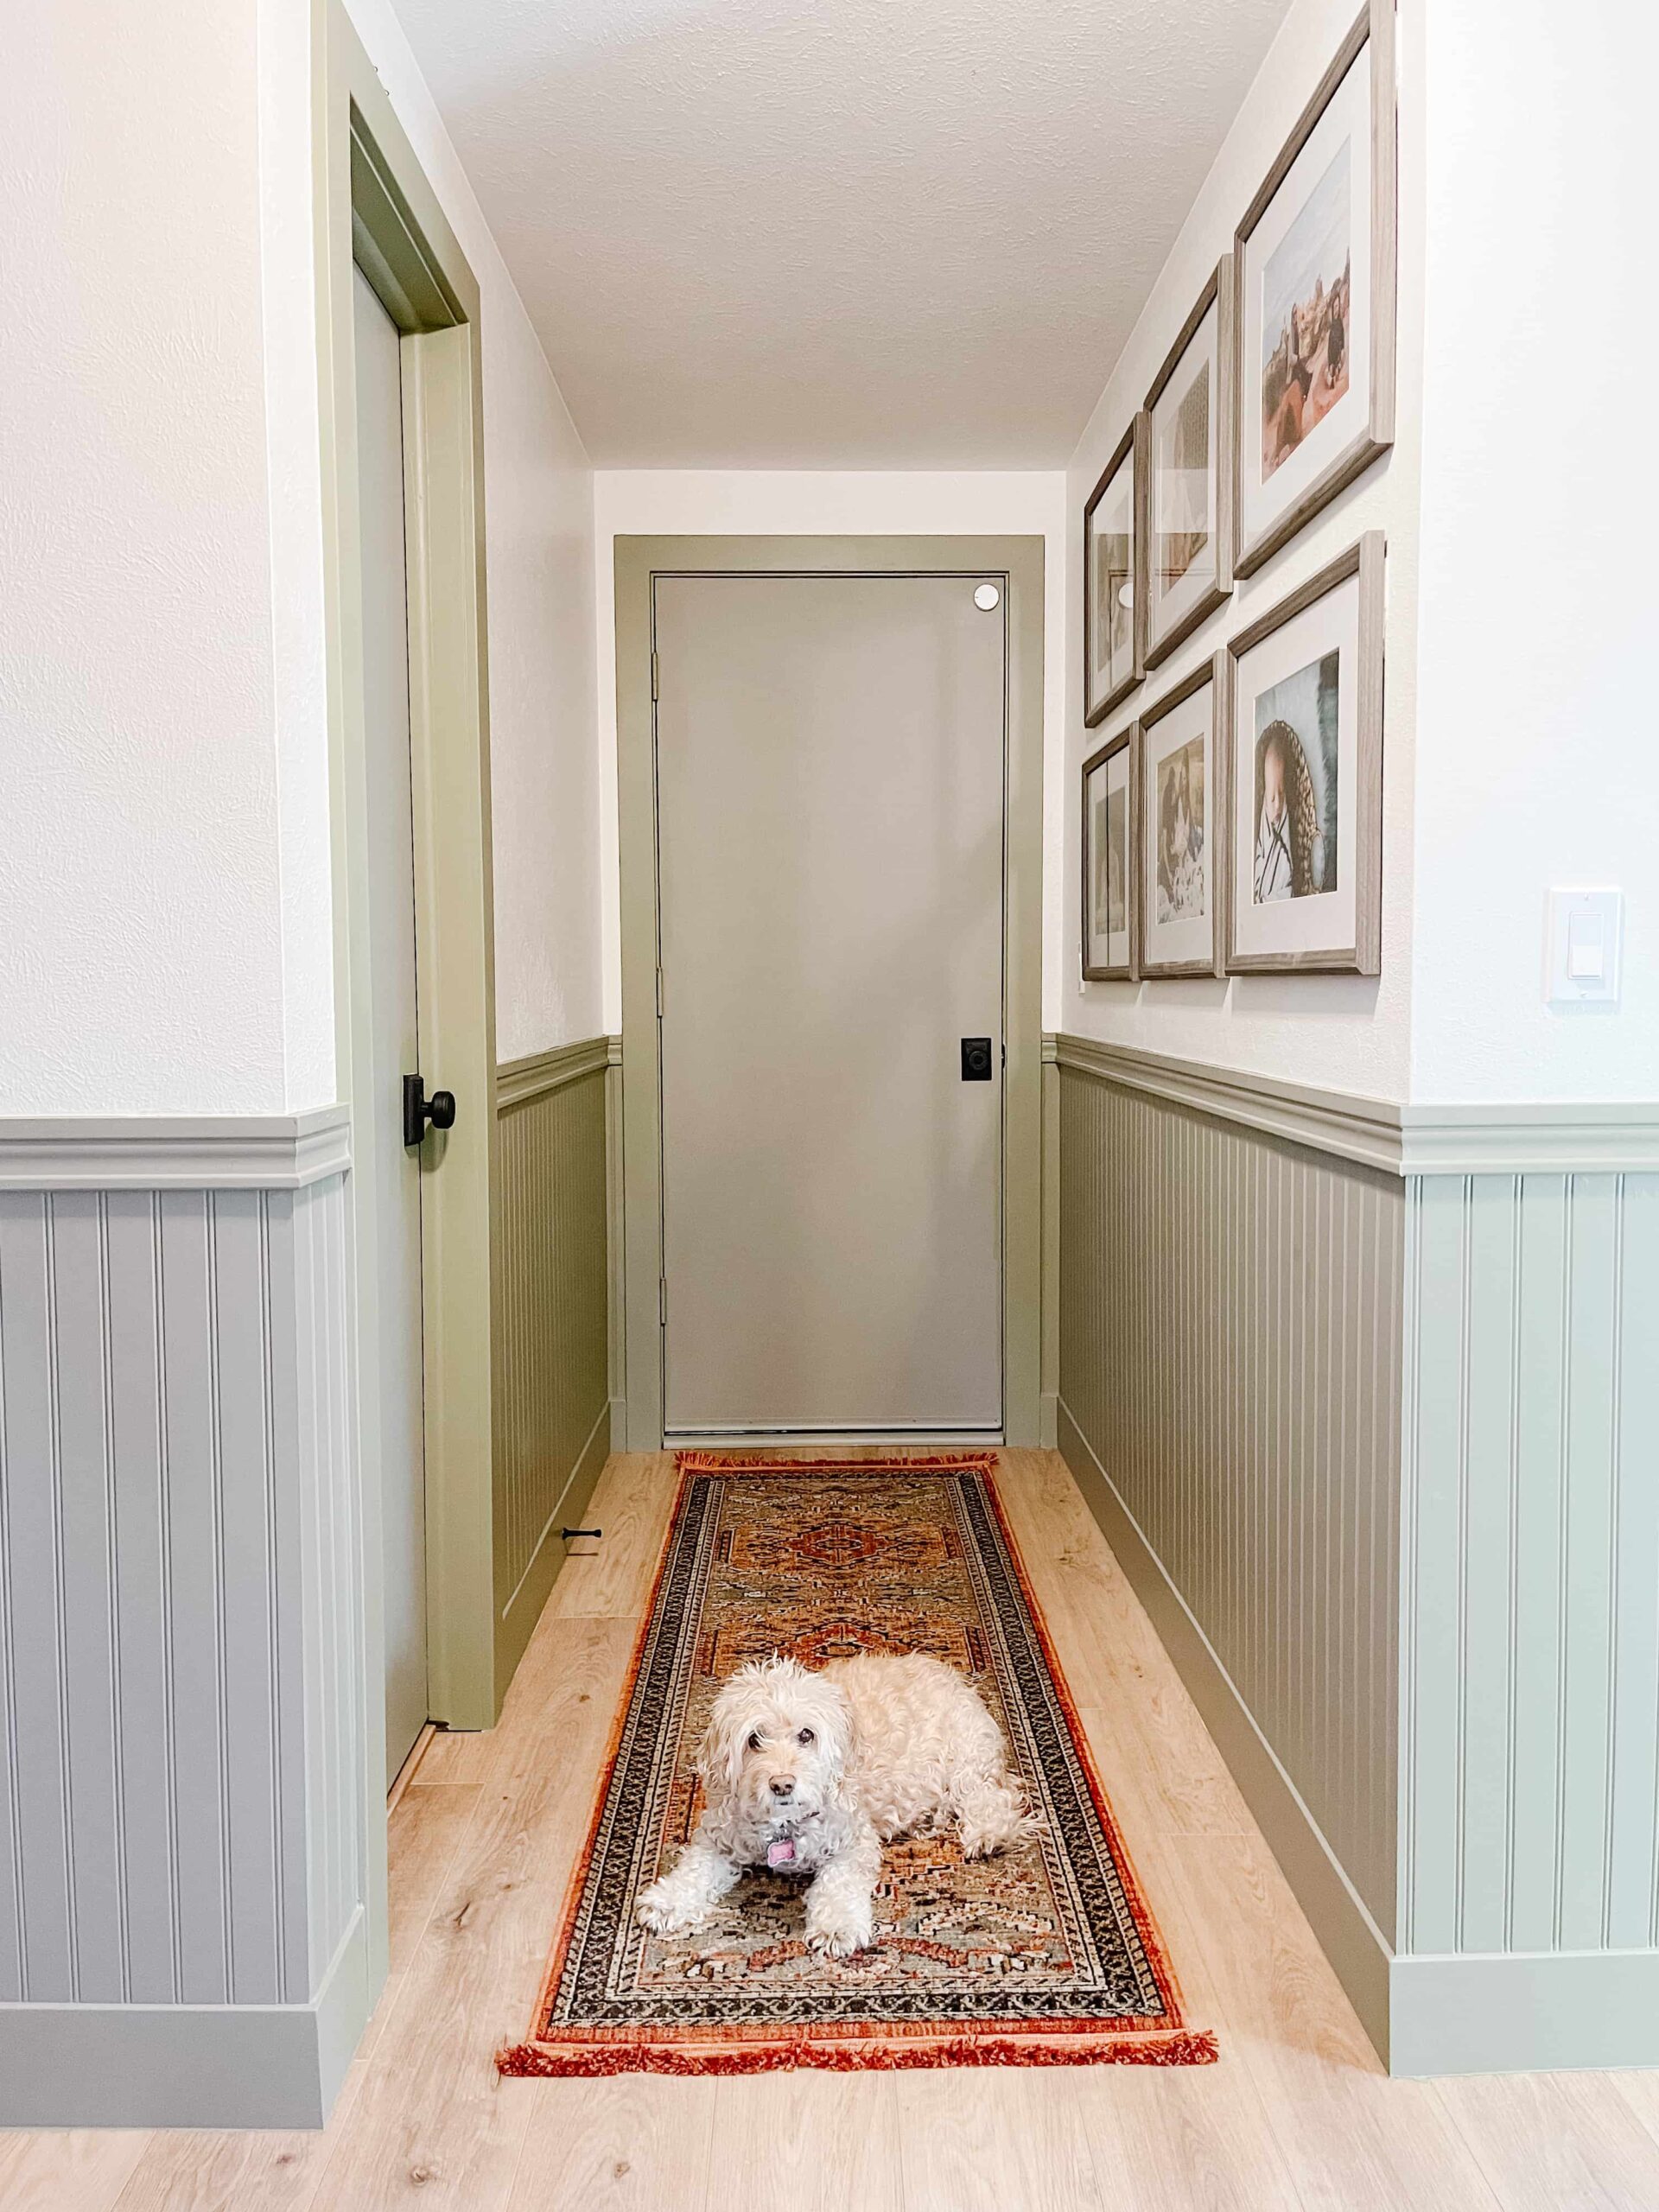 How to design a small mudroom - Green With Decor